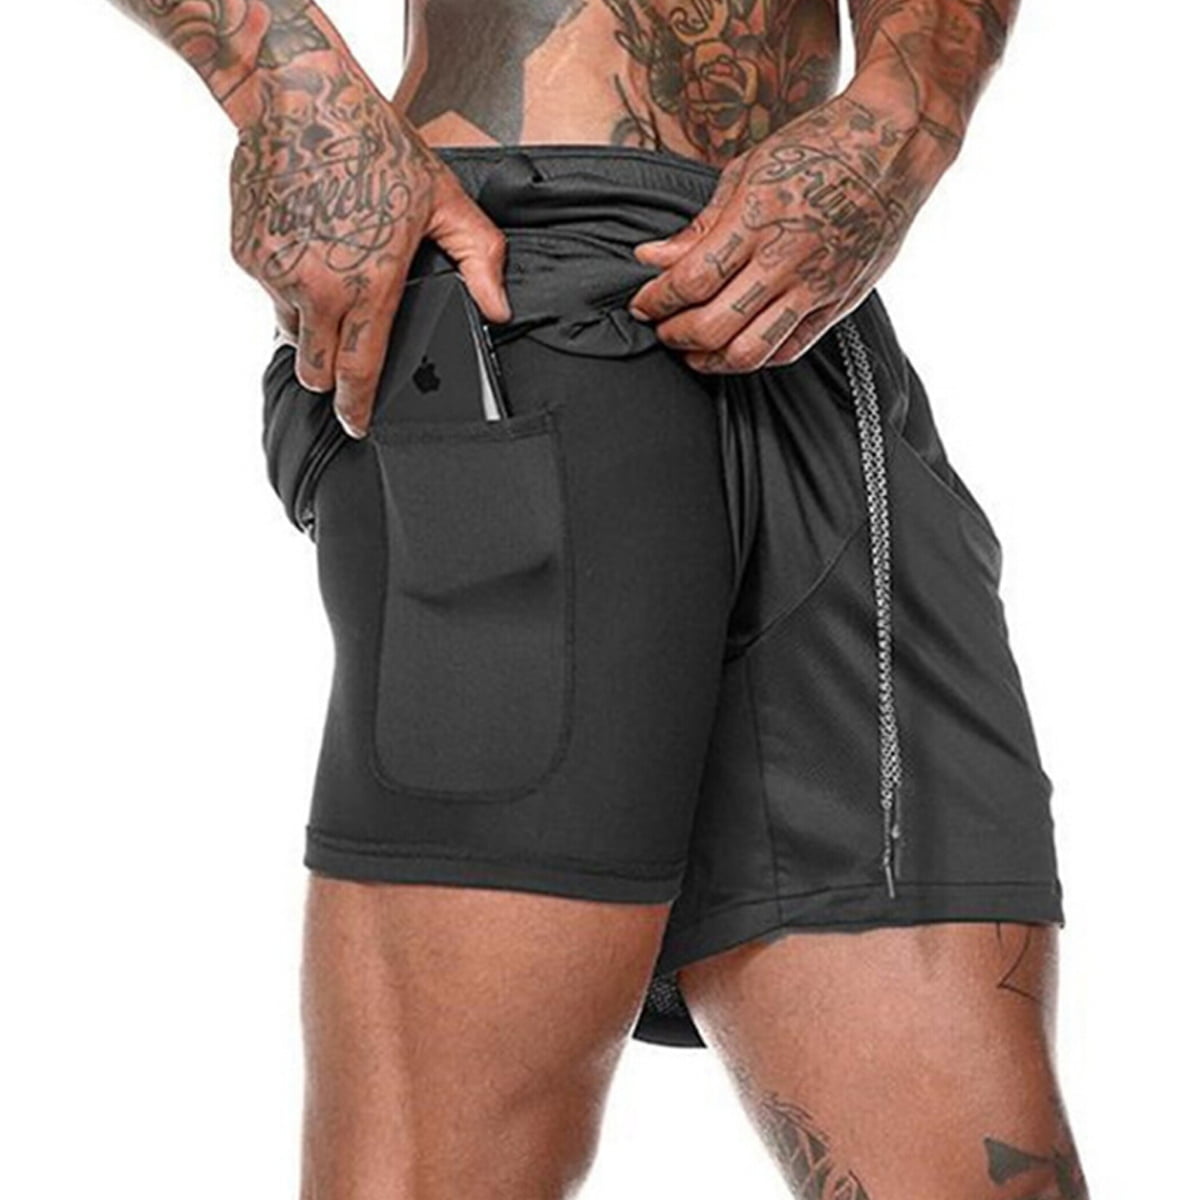 YAWHO Mens Workout Running Shorts Sports Fitness Gym Training Quick Dry Athletic Performance Shorts with Zip Pockets 